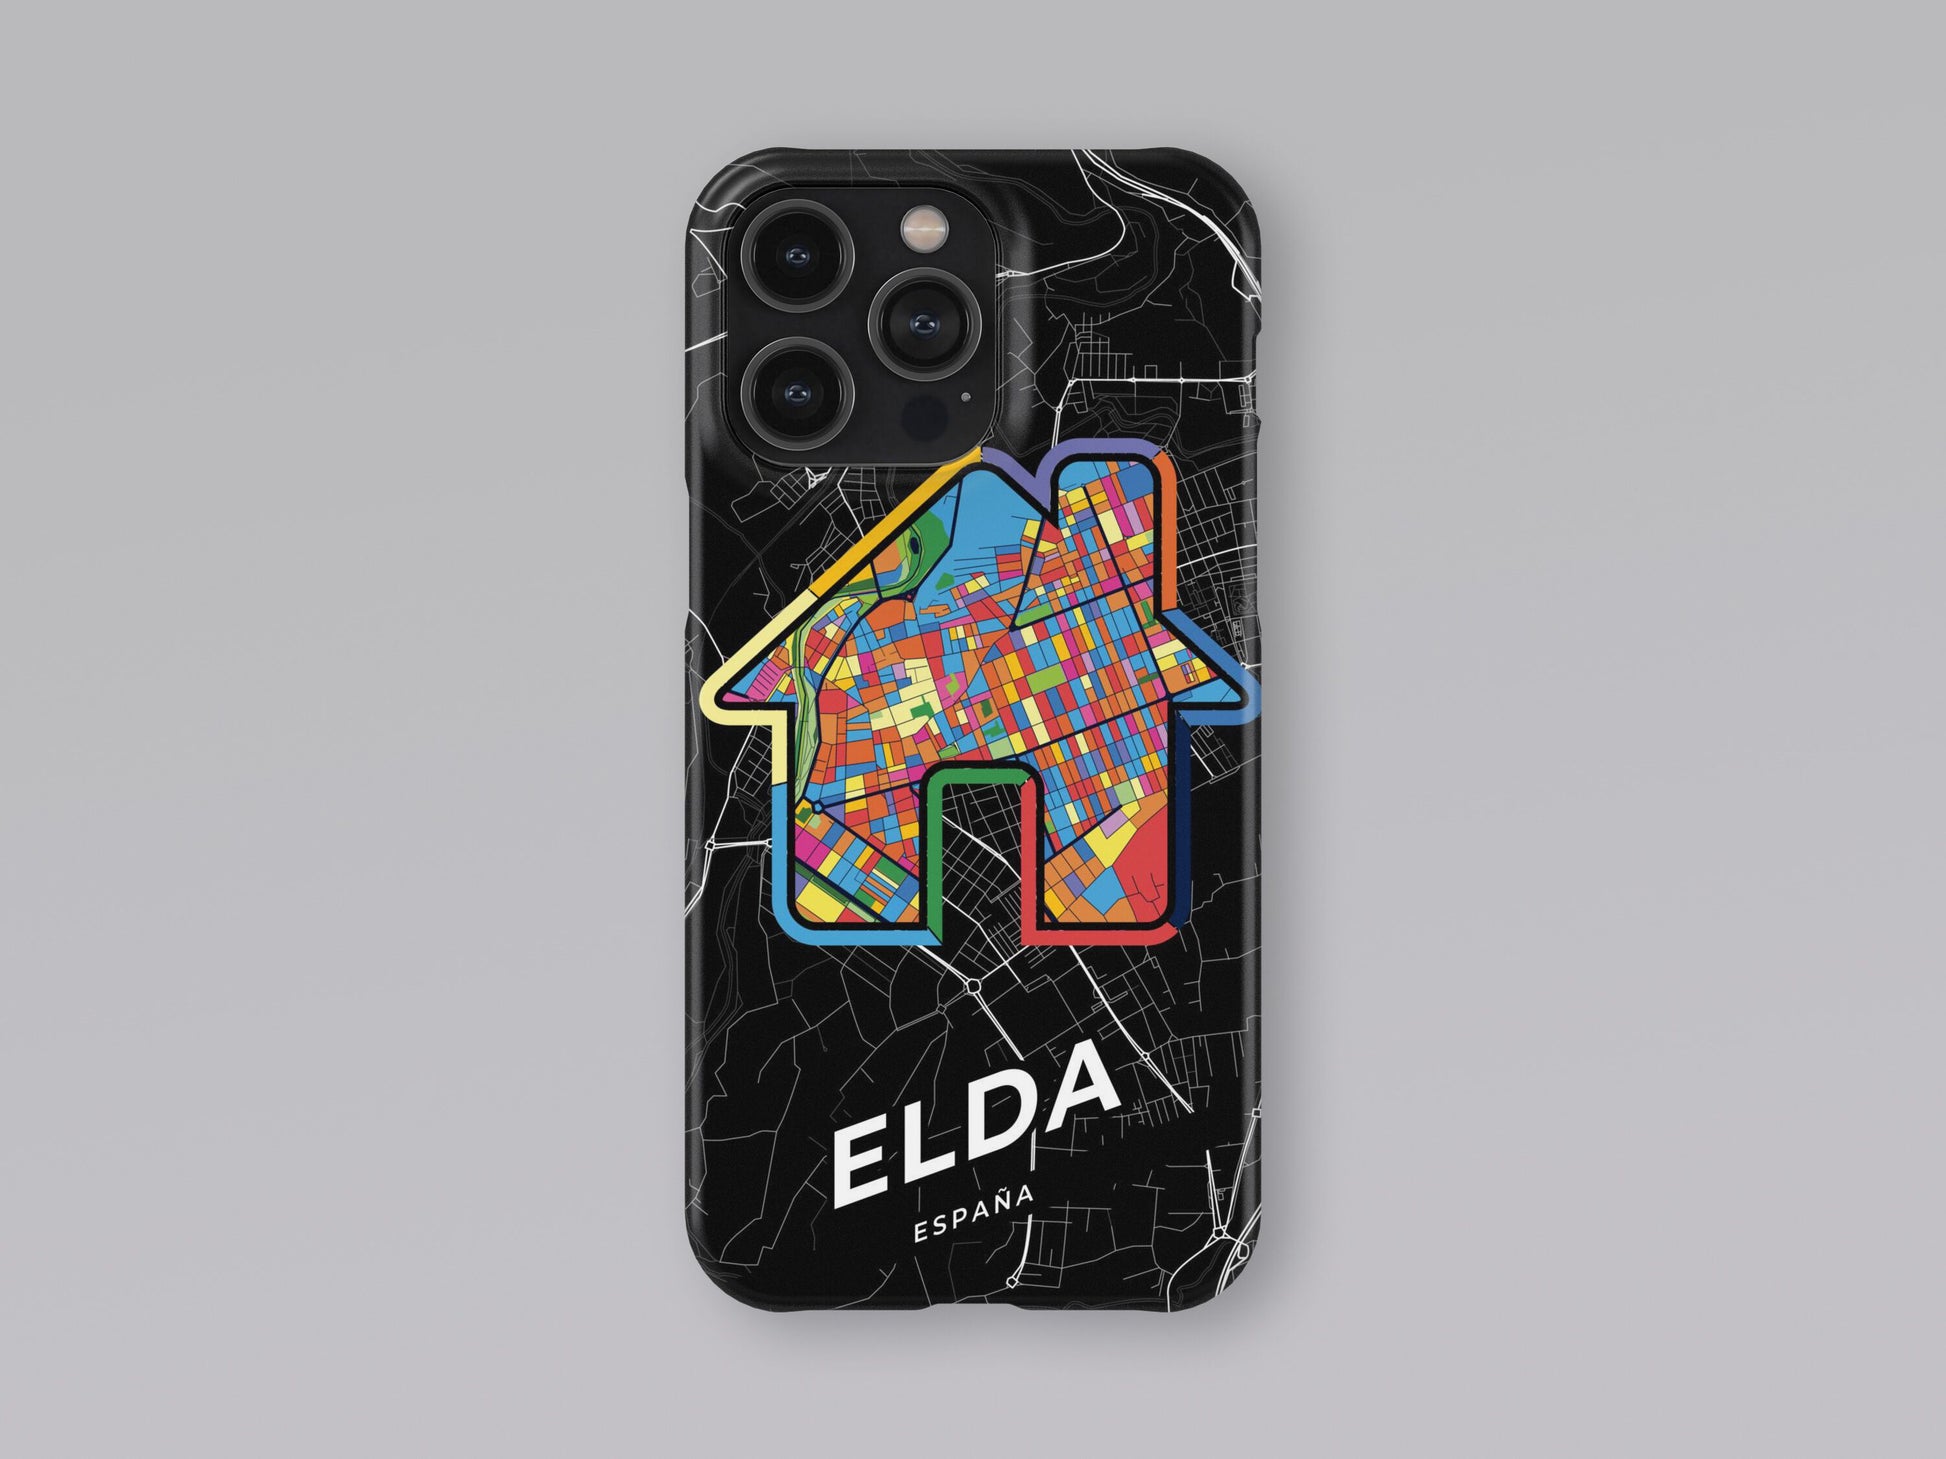 Elda Spain slim phone case with colorful icon. Birthday, wedding or housewarming gift. Couple match cases. 3